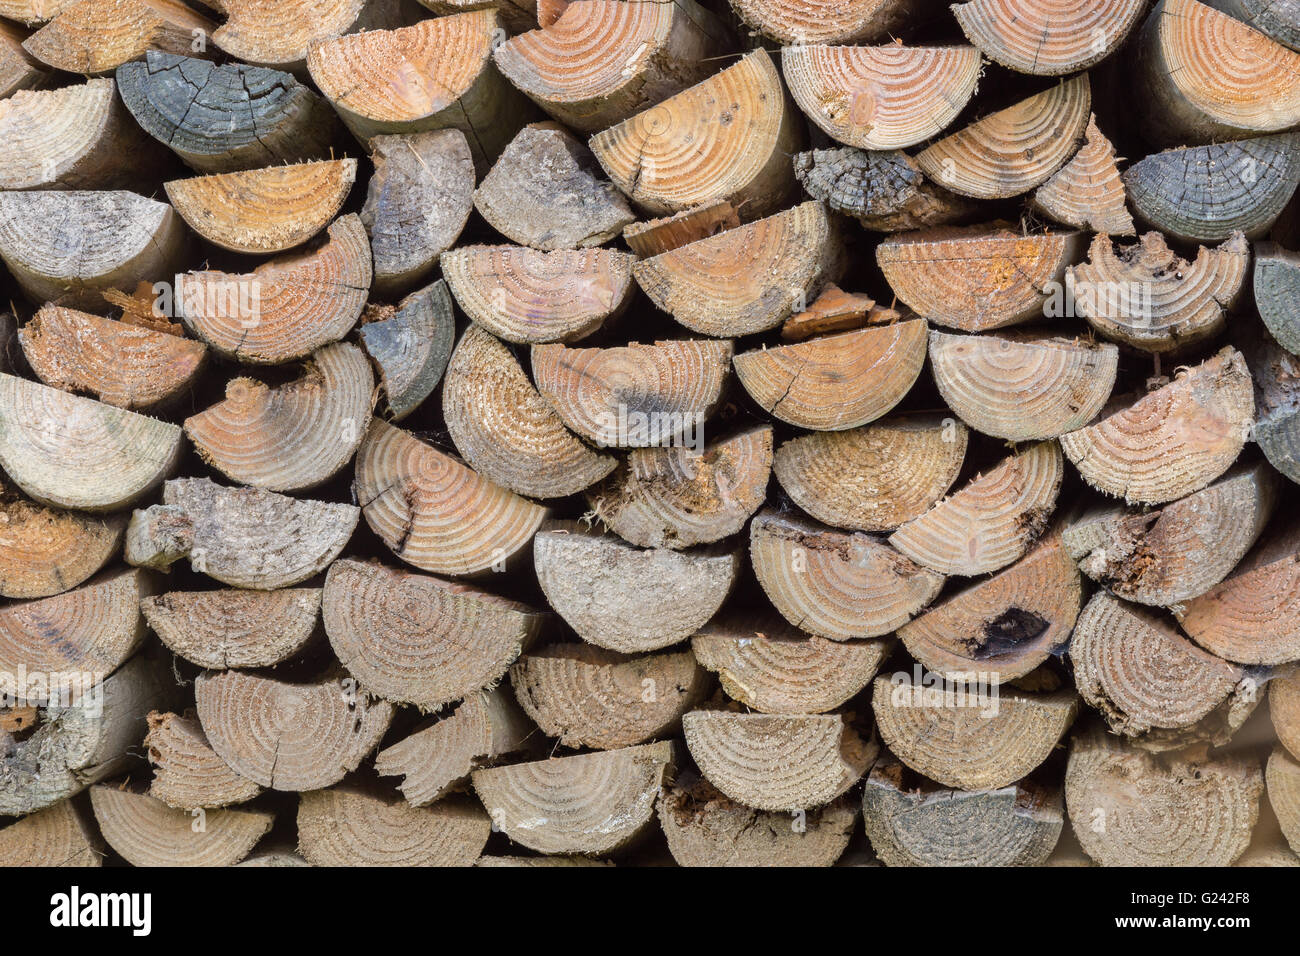 A stack of split wood. Stock Photo